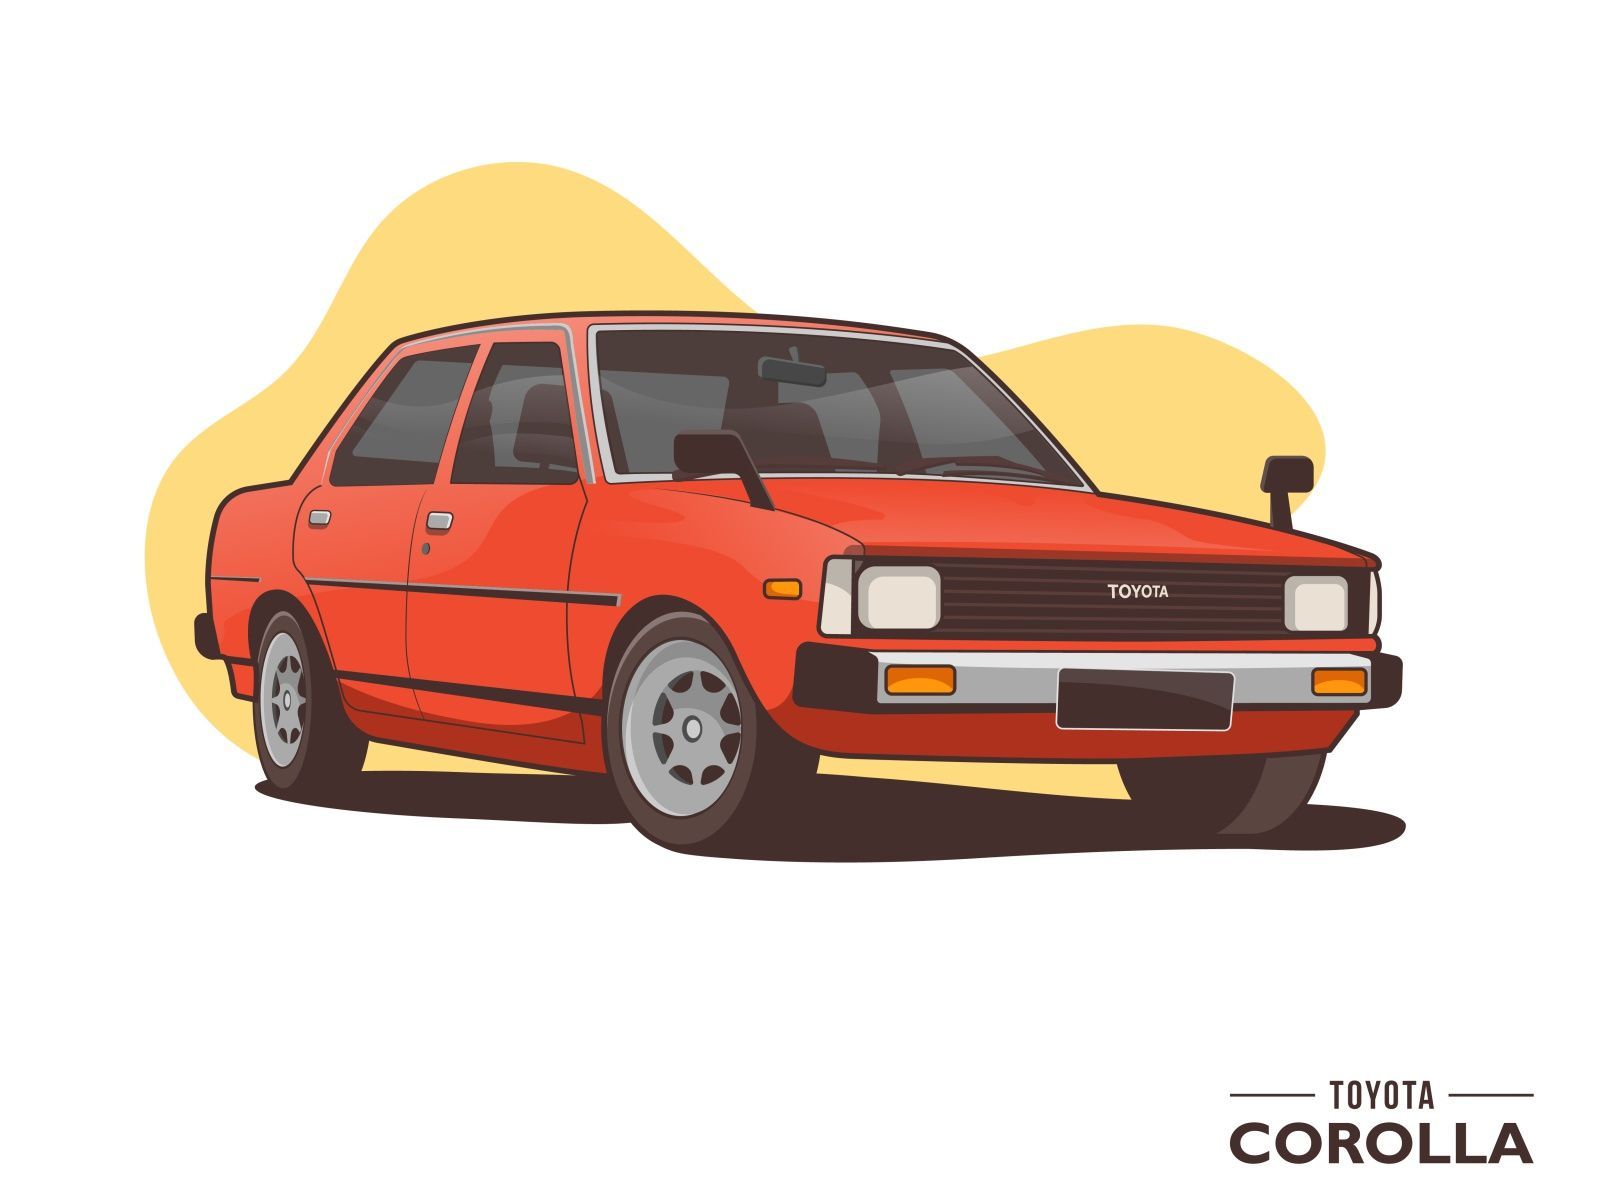 toyota corolla. old car classic. Old cars classic, Toyota corolla, Corolla car